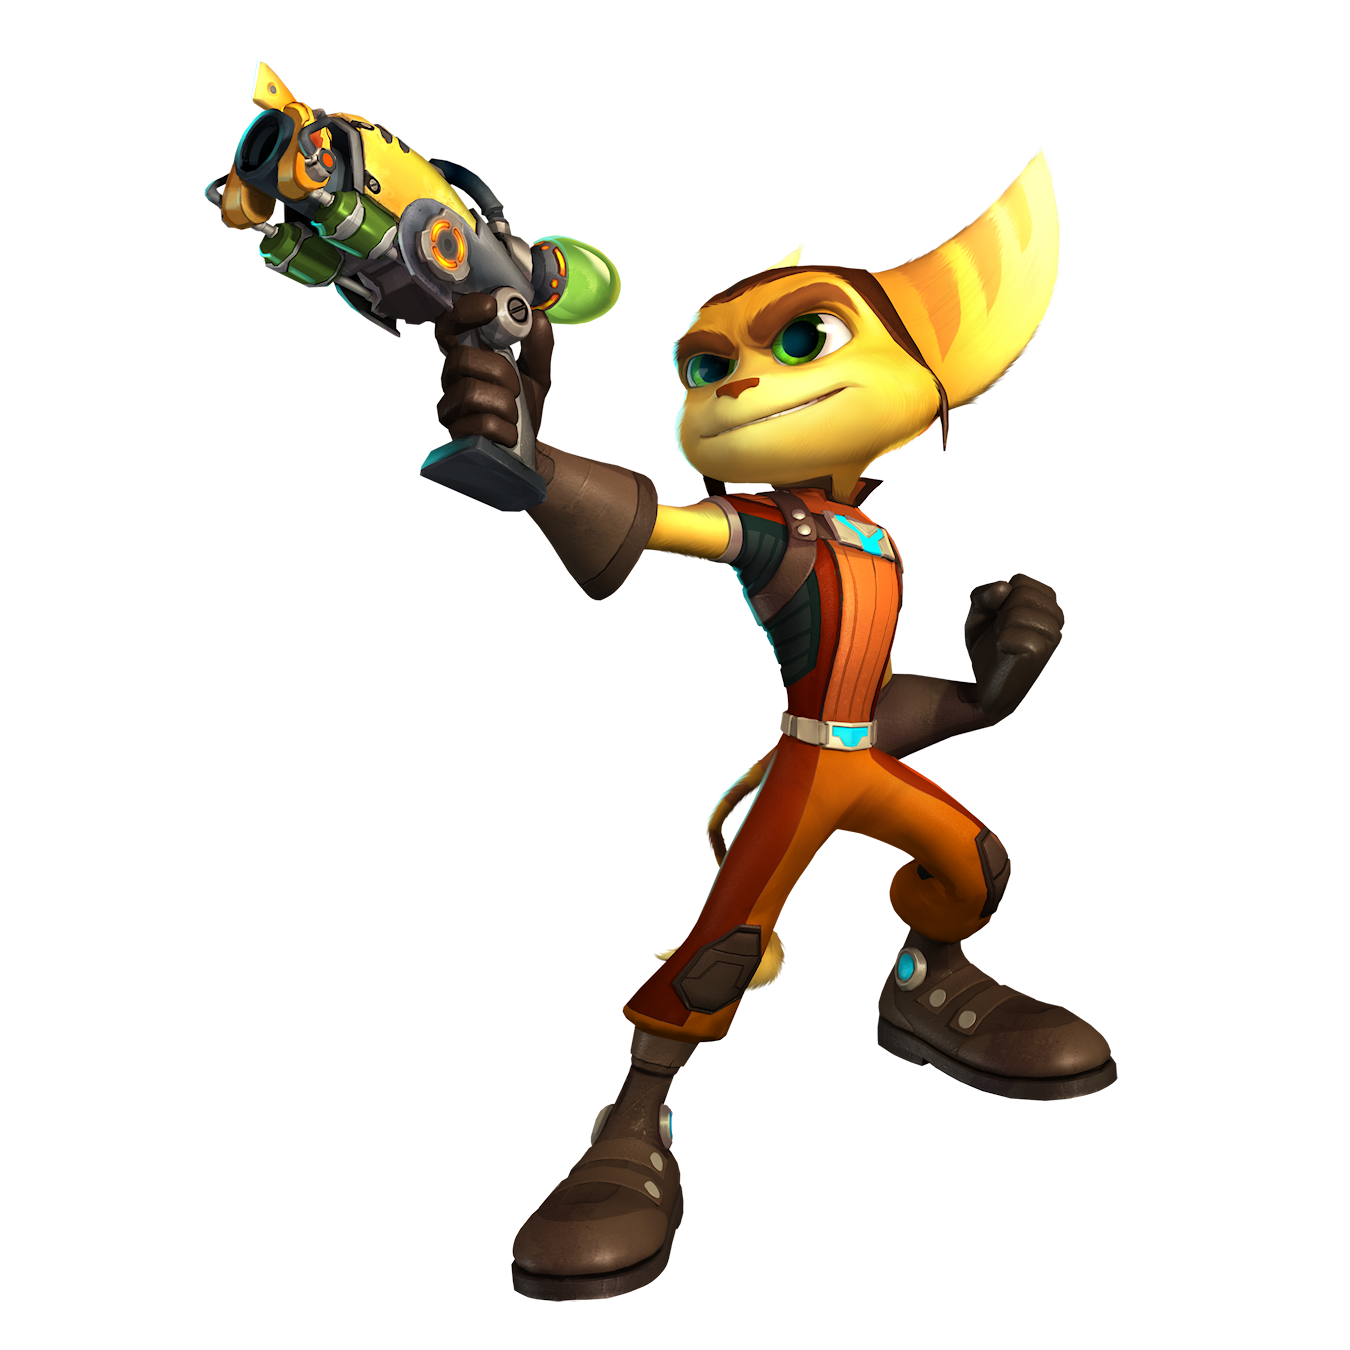 Ratchet & Clank (2016 game), Ratchet & Clank Wiki